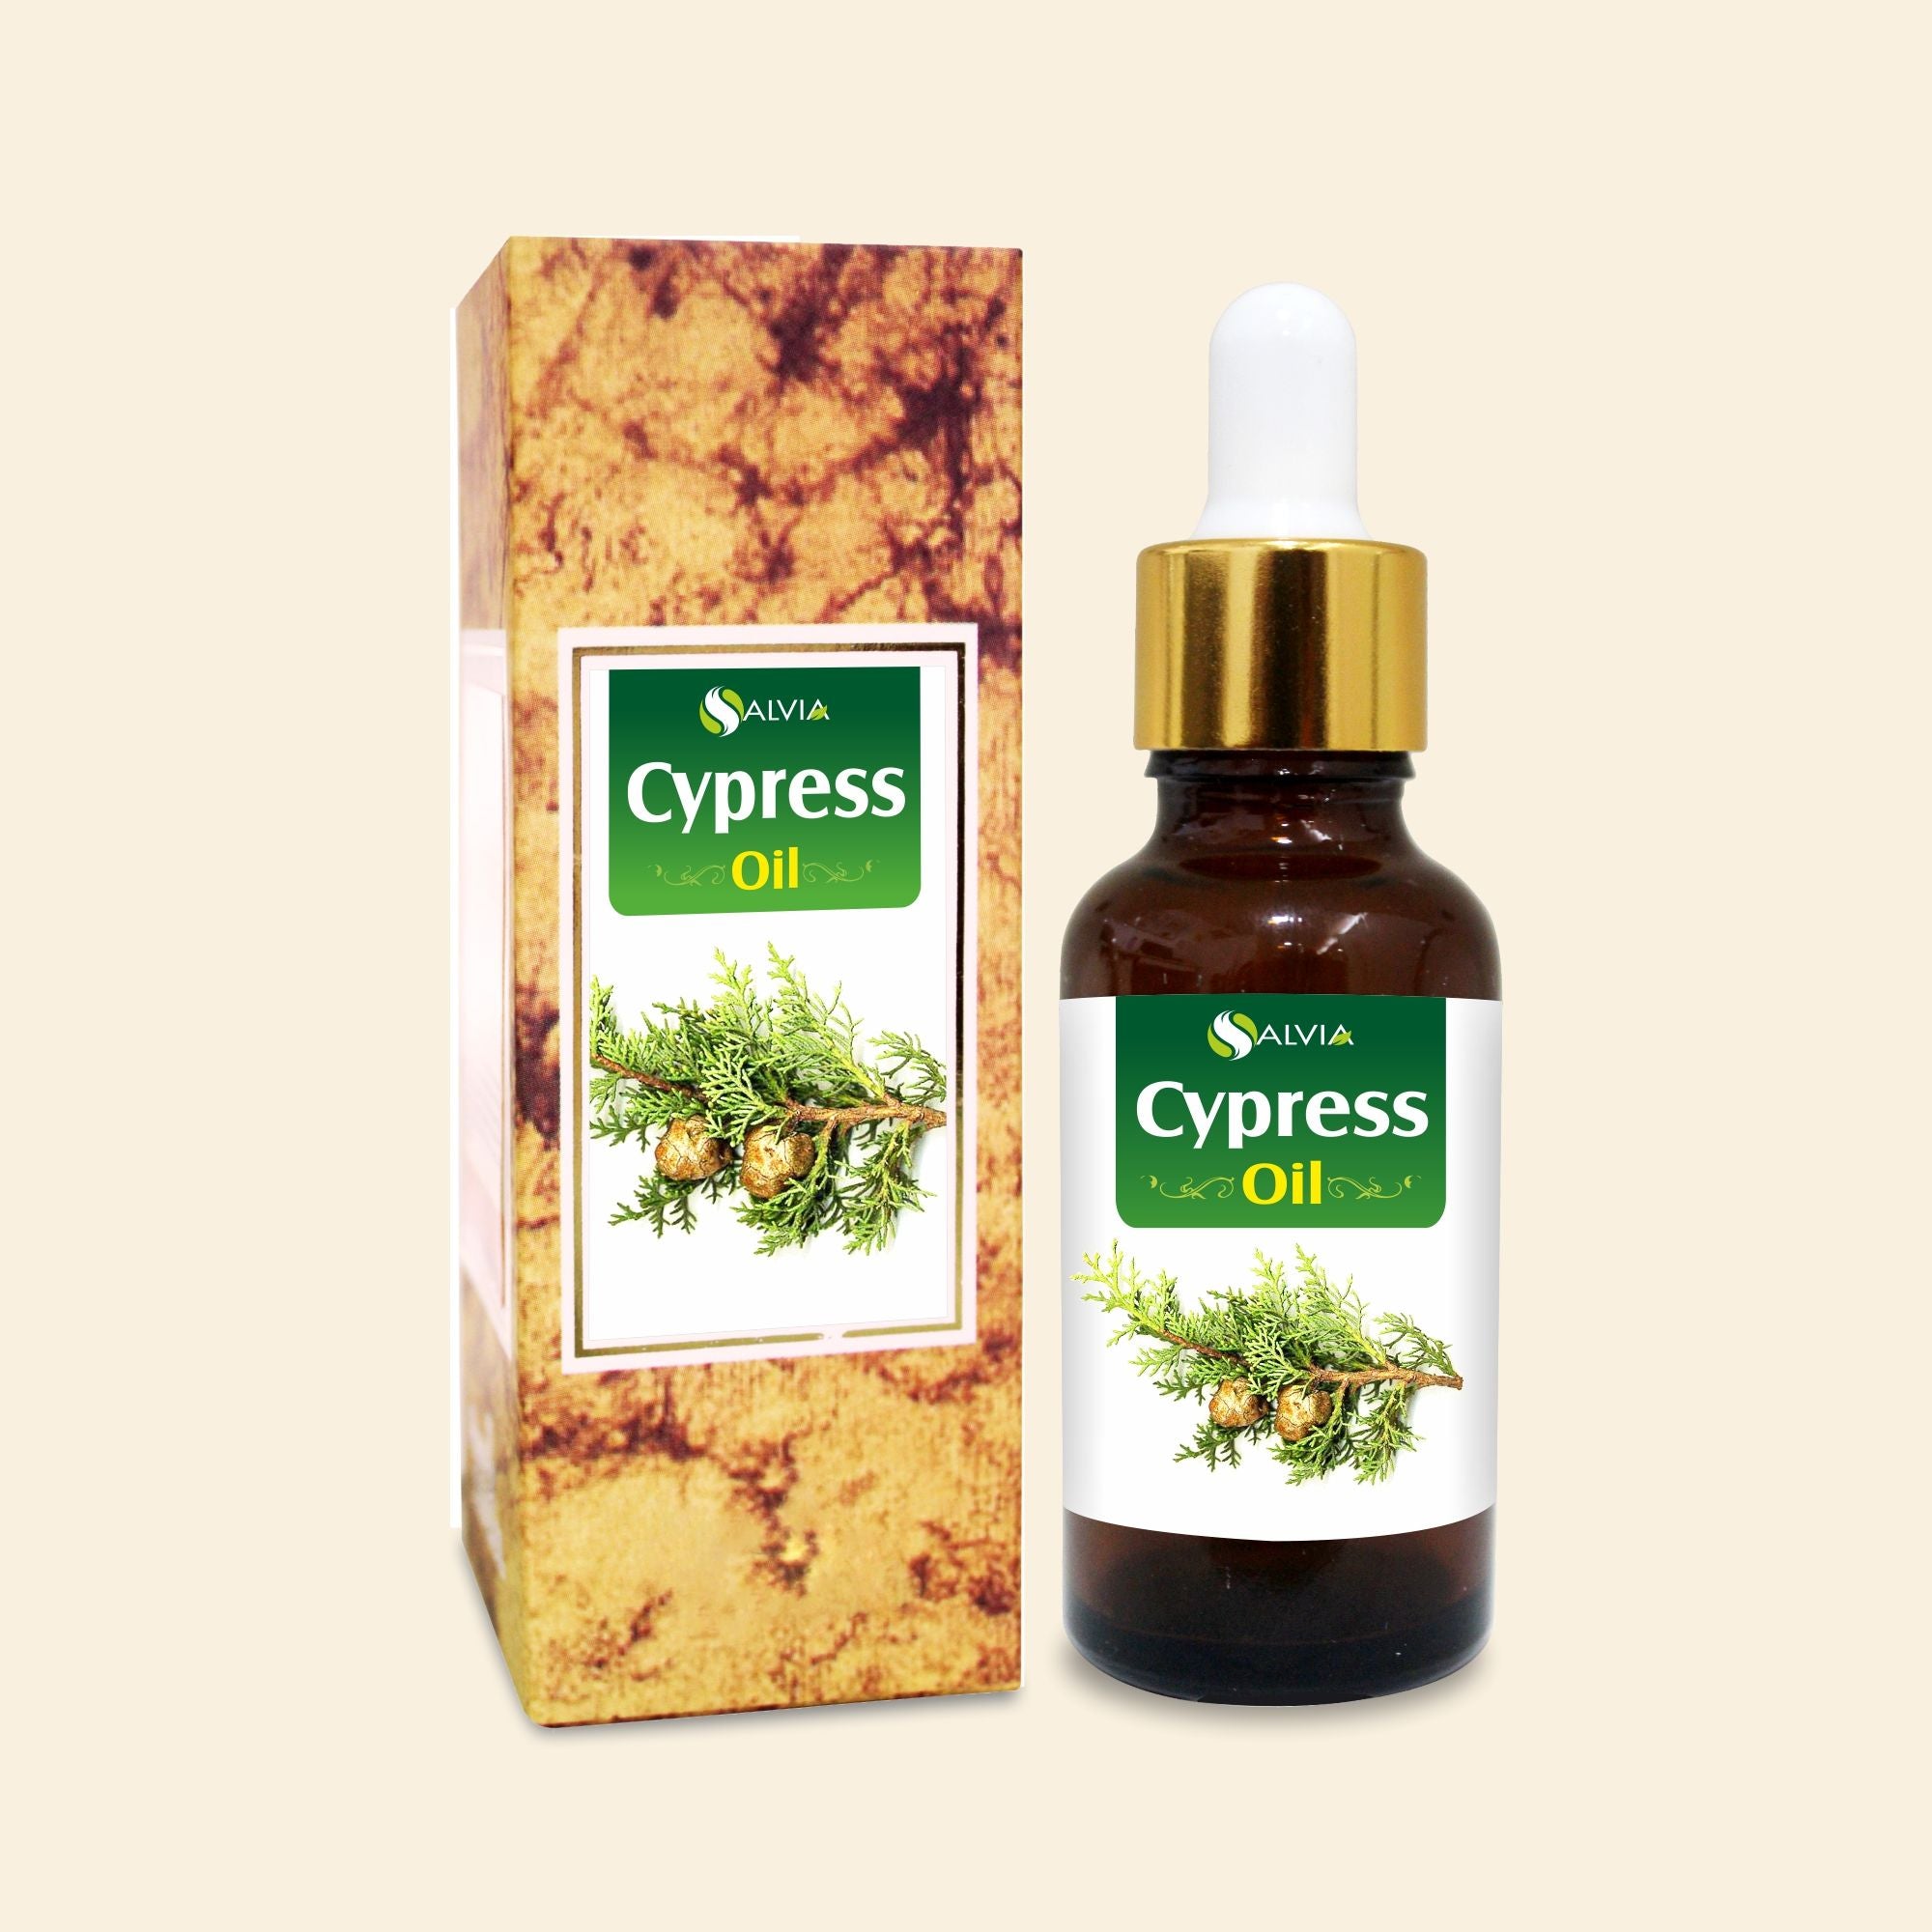 Salvia Natural Carrier Oils,Greasy Oil,Acne,Anti-acne Oil,Oil for Greasy hair Cypress Oil (Cupressus sempervirens) 100% Natural Pure Essential Oil